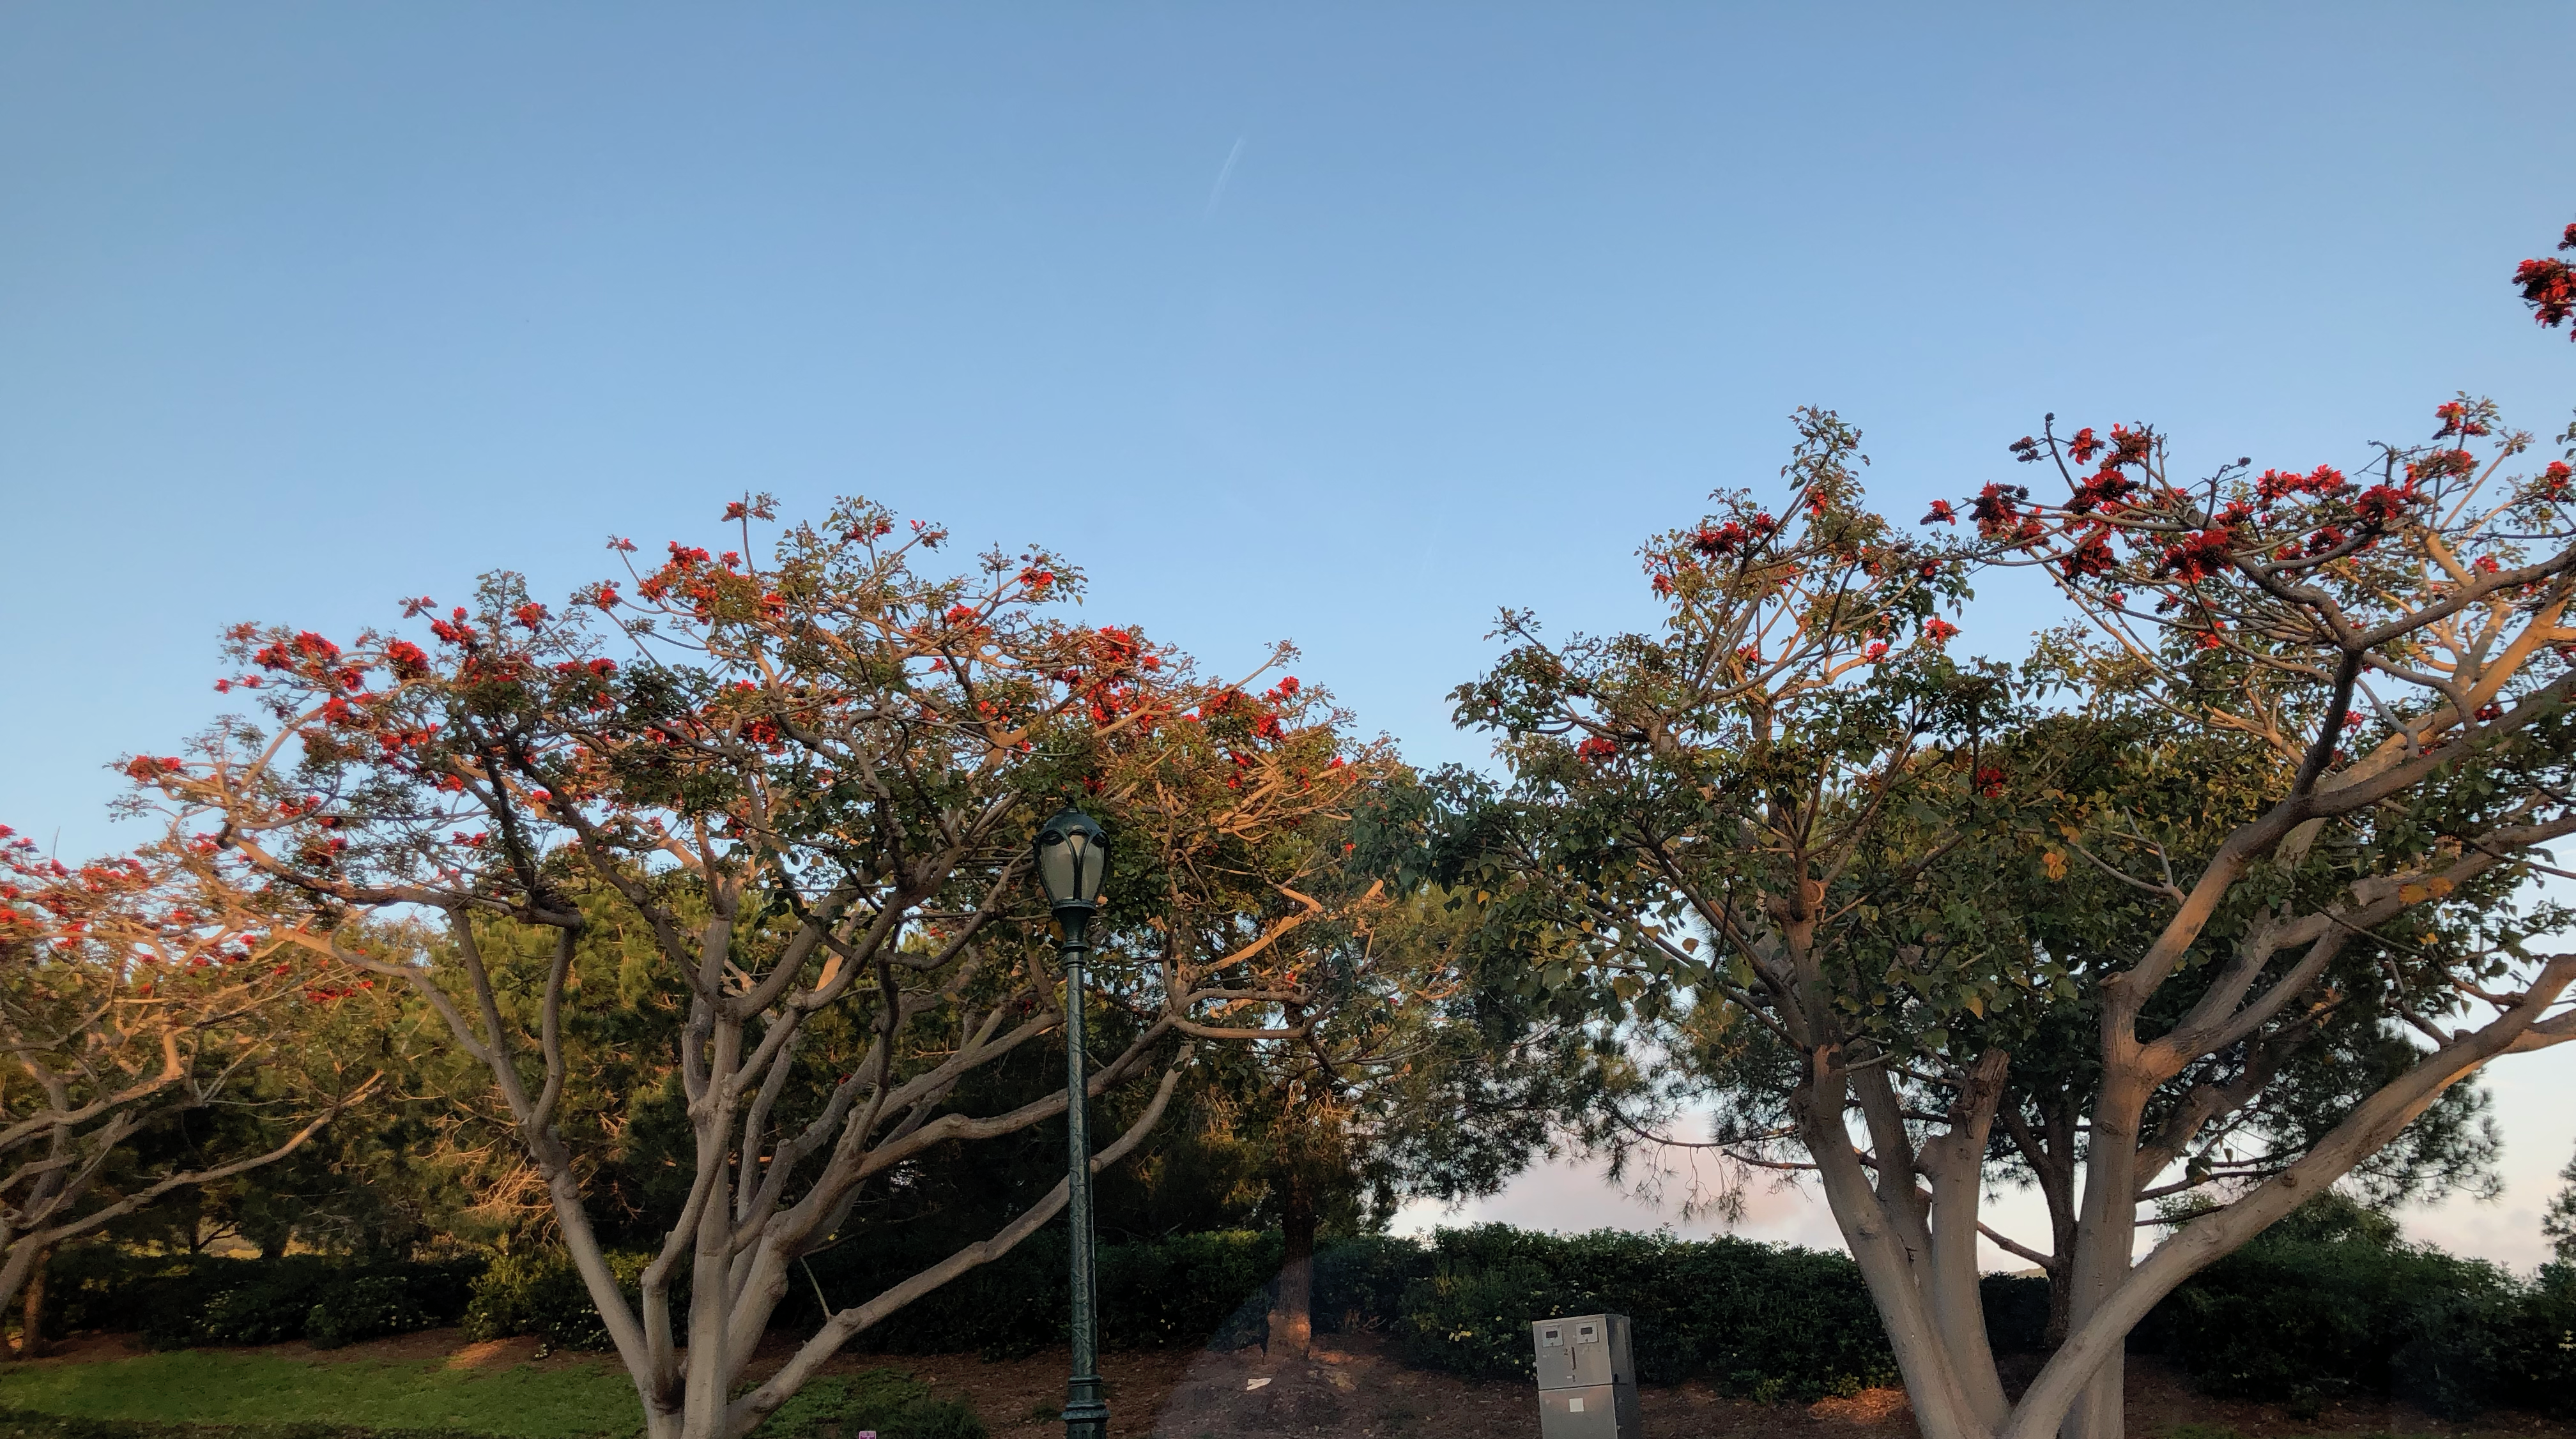 The Trees are Flowering in Newport Beach